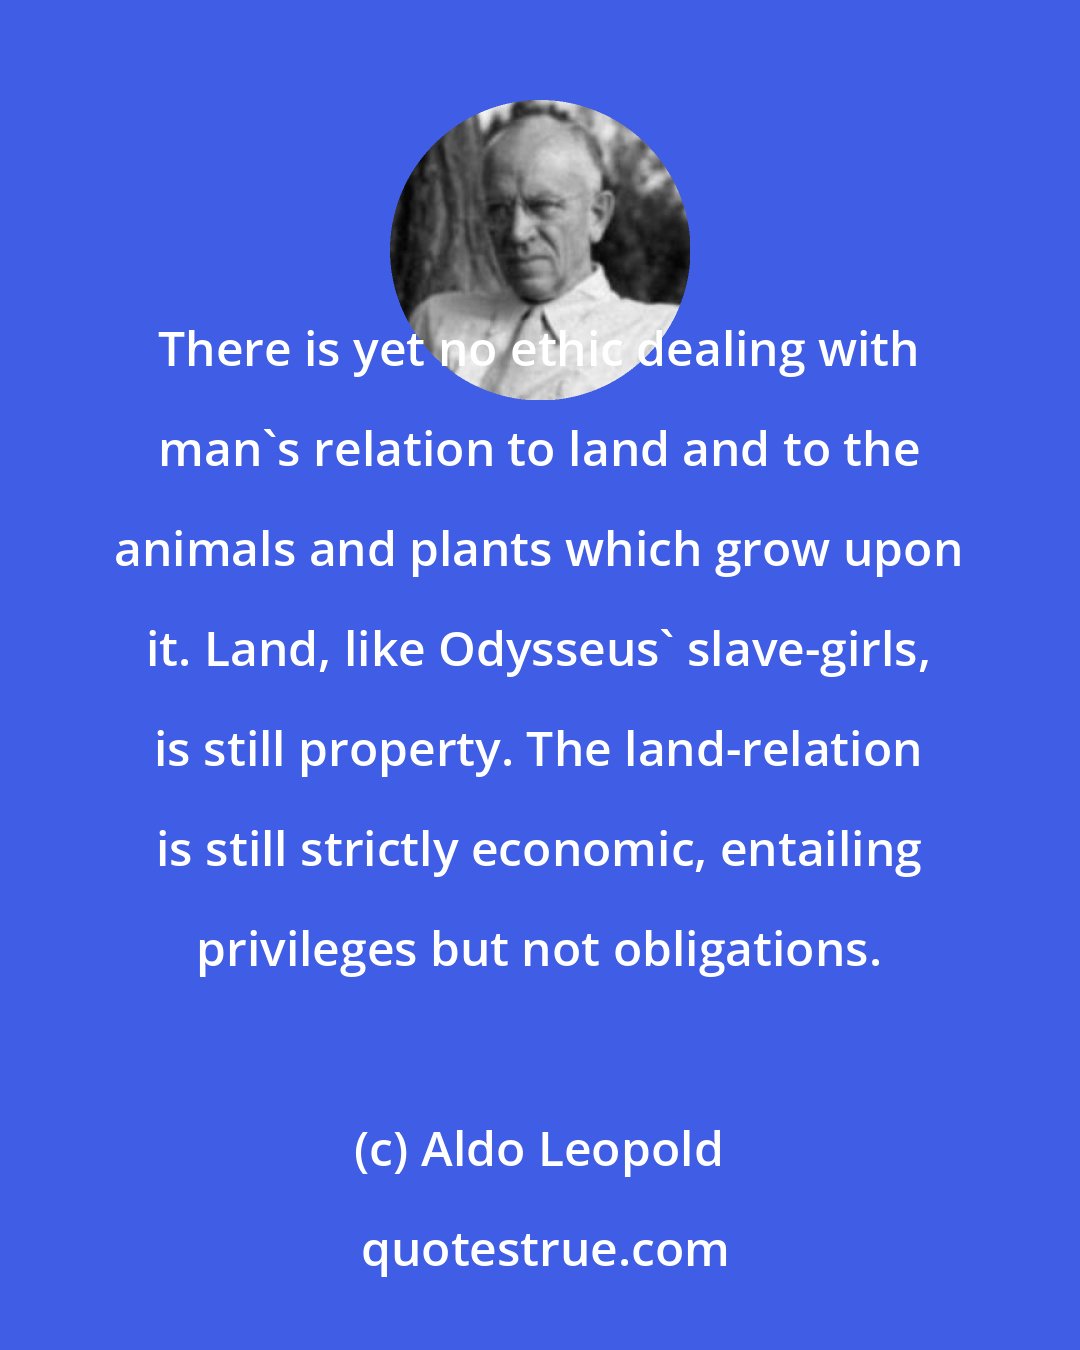 Aldo Leopold: There is yet no ethic dealing with man's relation to land and to the animals and plants which grow upon it. Land, like Odysseus' slave-girls, is still property. The land-relation is still strictly economic, entailing privileges but not obligations.